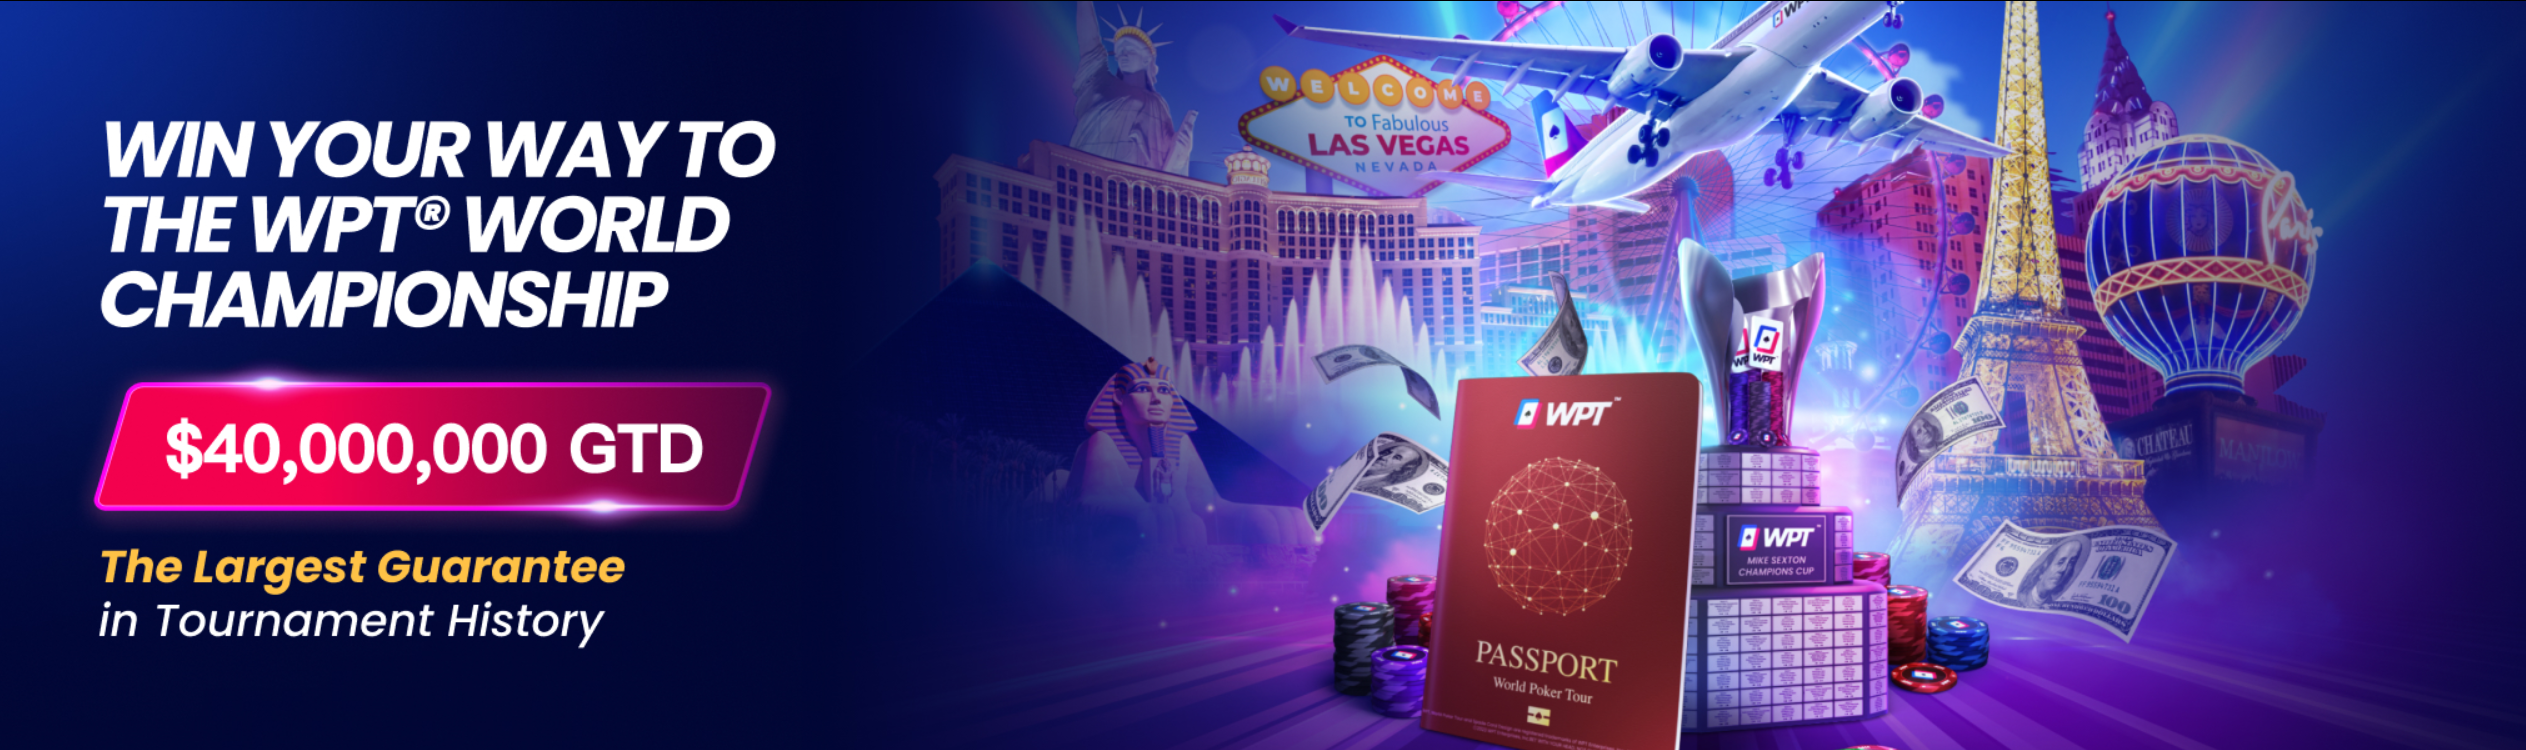 Win Your Way to the WPT World Championship in Las Vegas with WPT Global